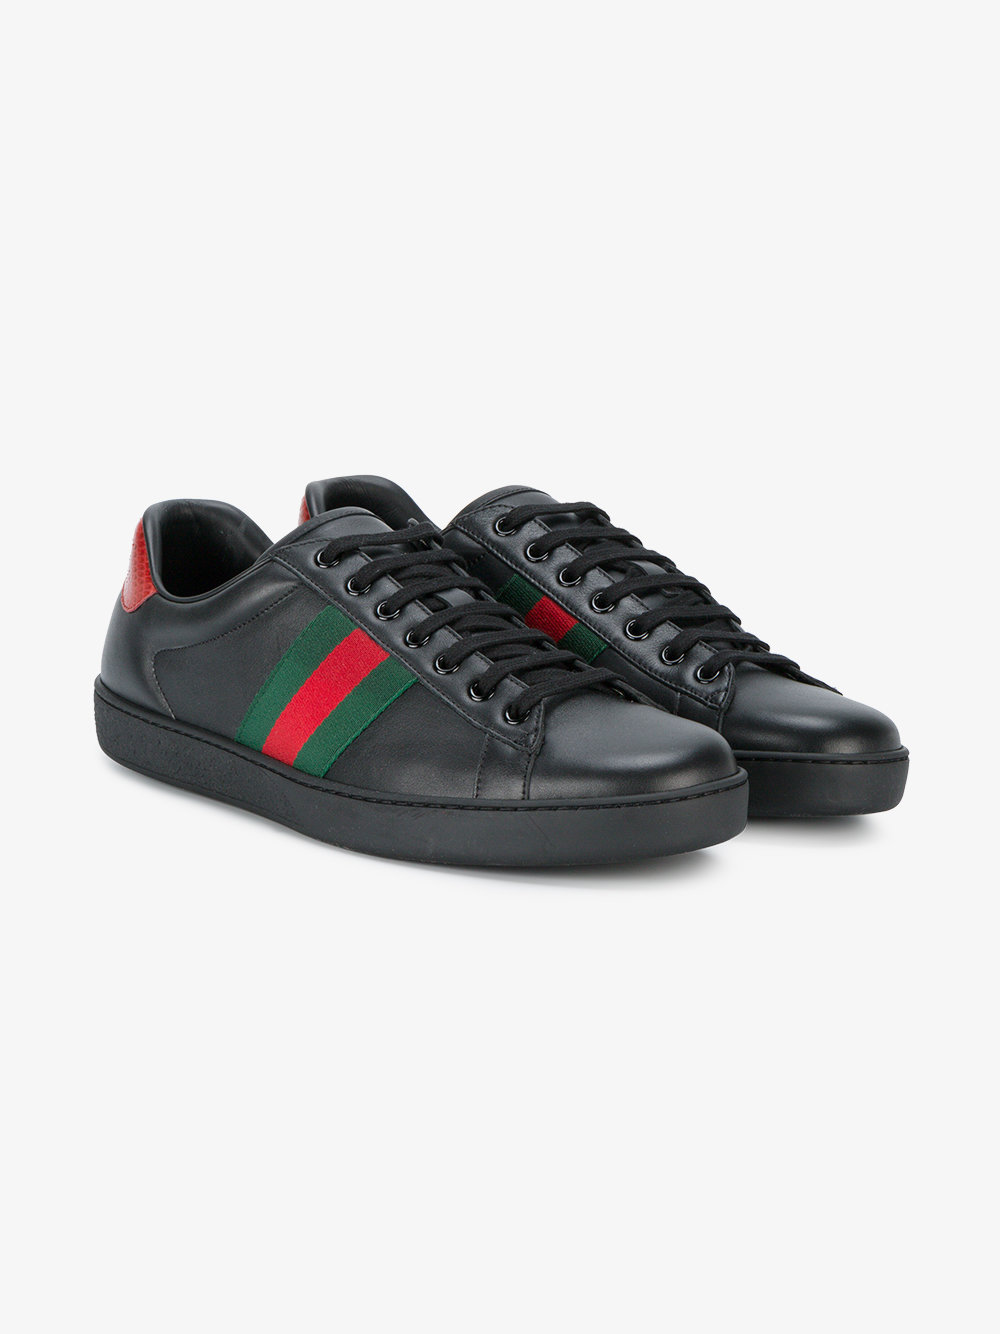 Very Goods | Gucci Black Ace New | Trainers | Fashion